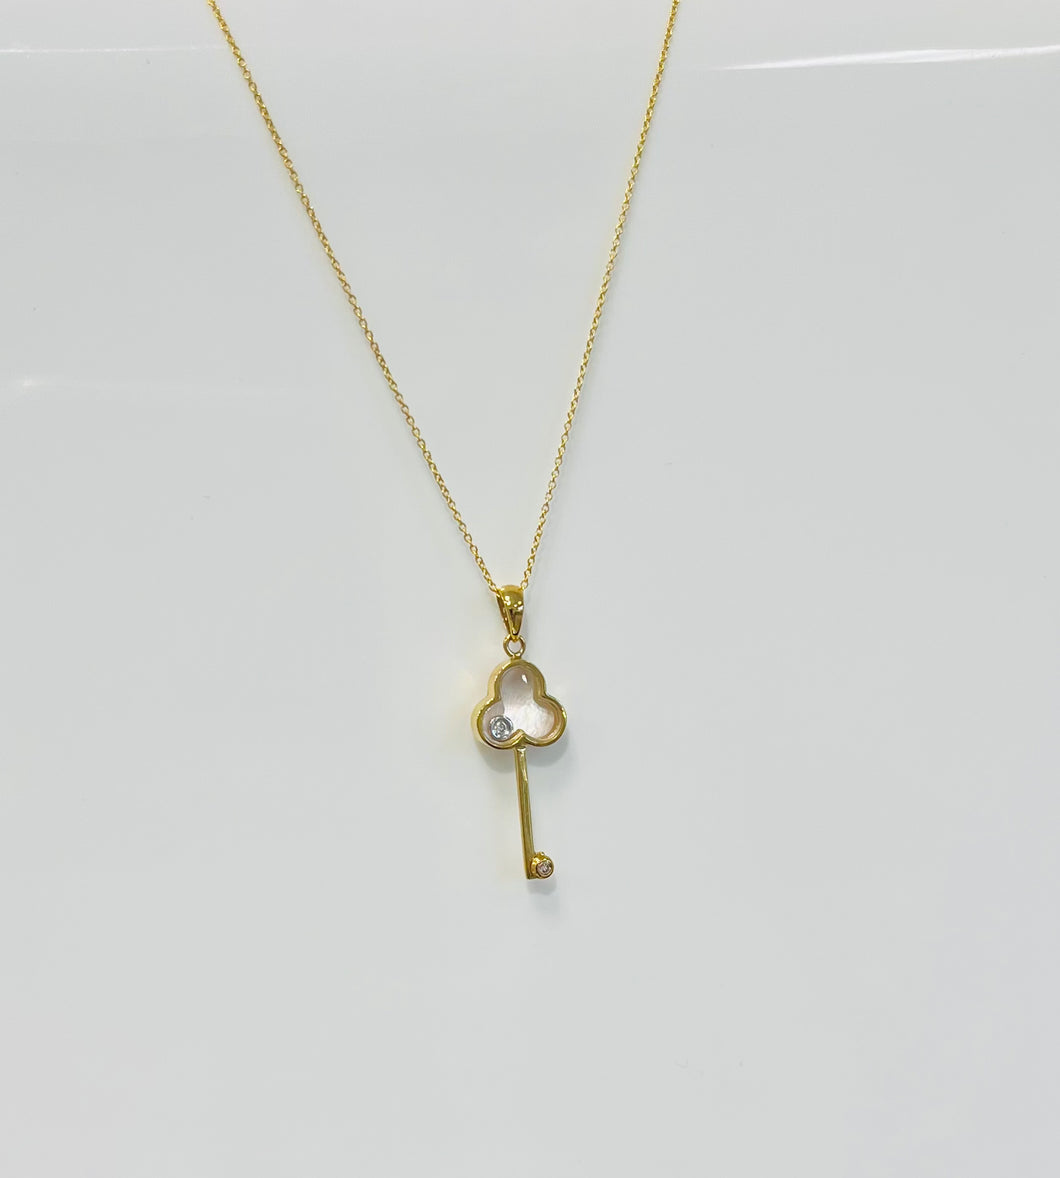 10k Yellow Gold Key Necklace